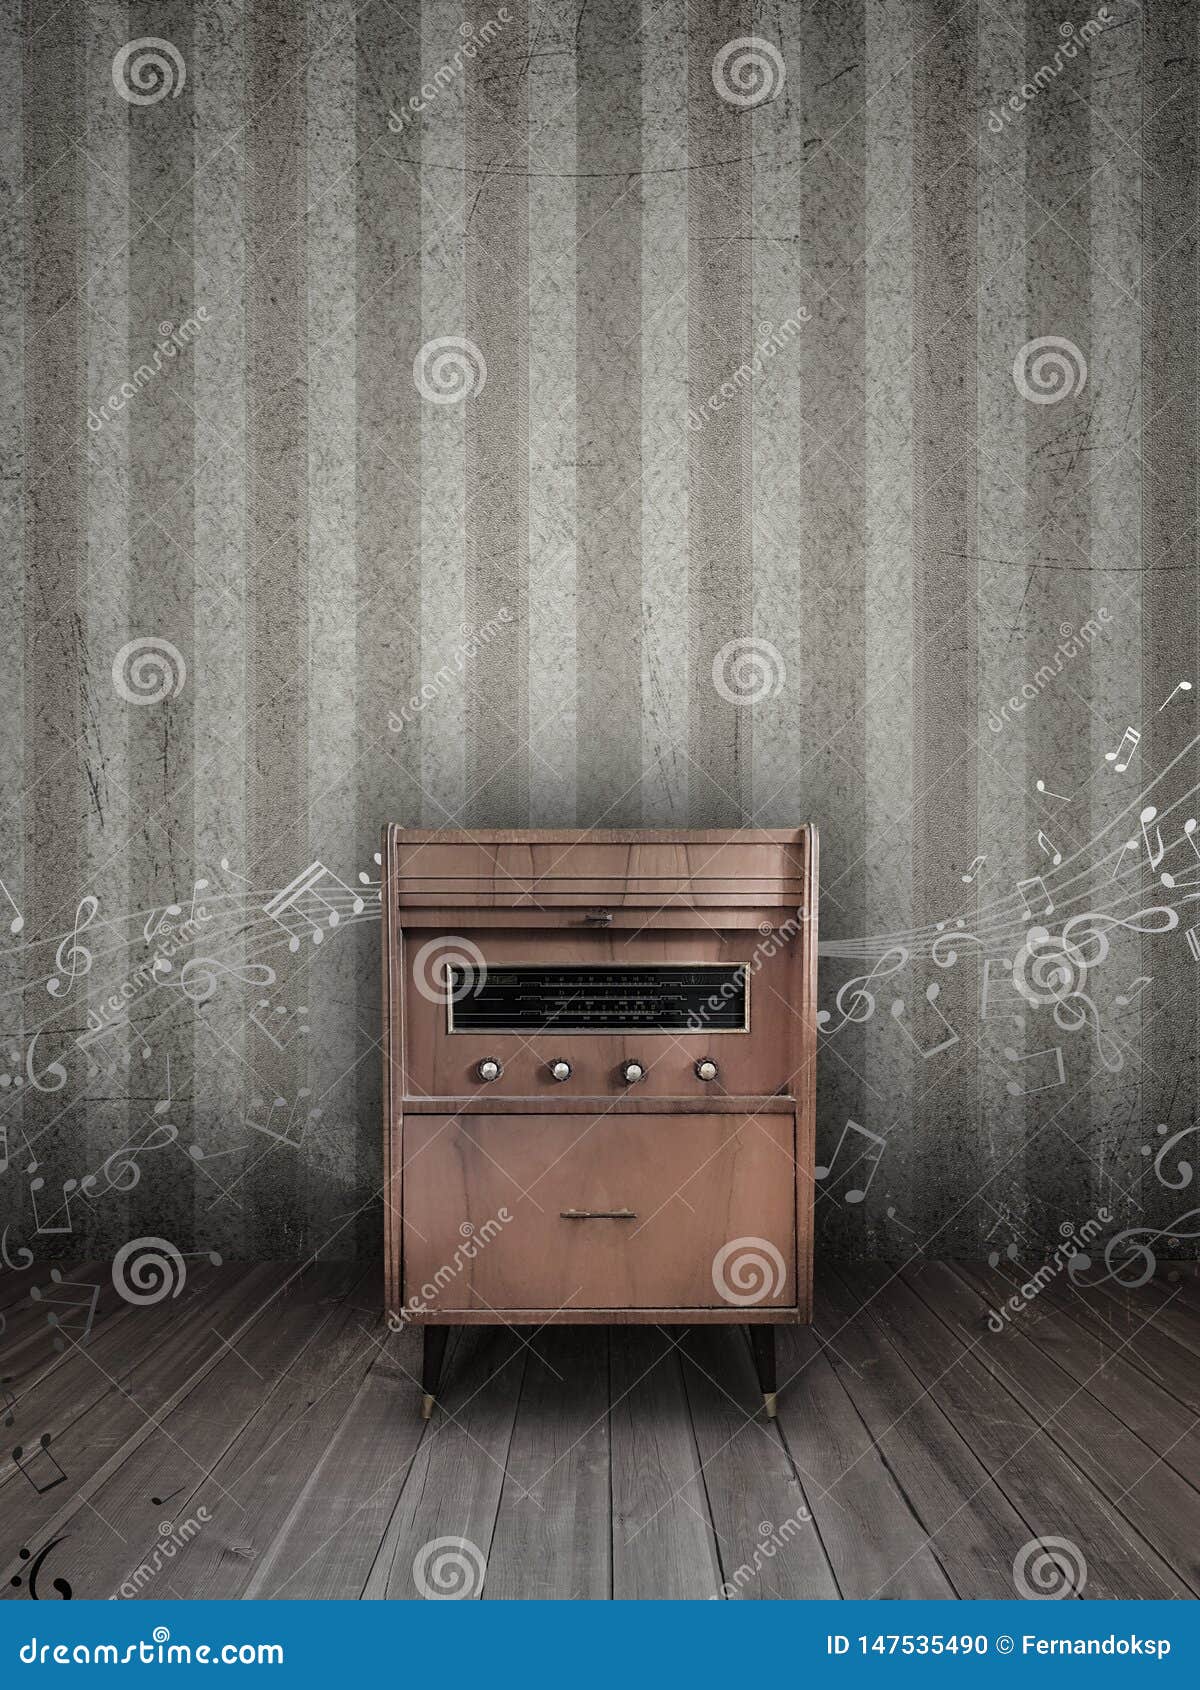 Old Wooden Retro Style Radio Receiver And Vinyl Player Stock Photo